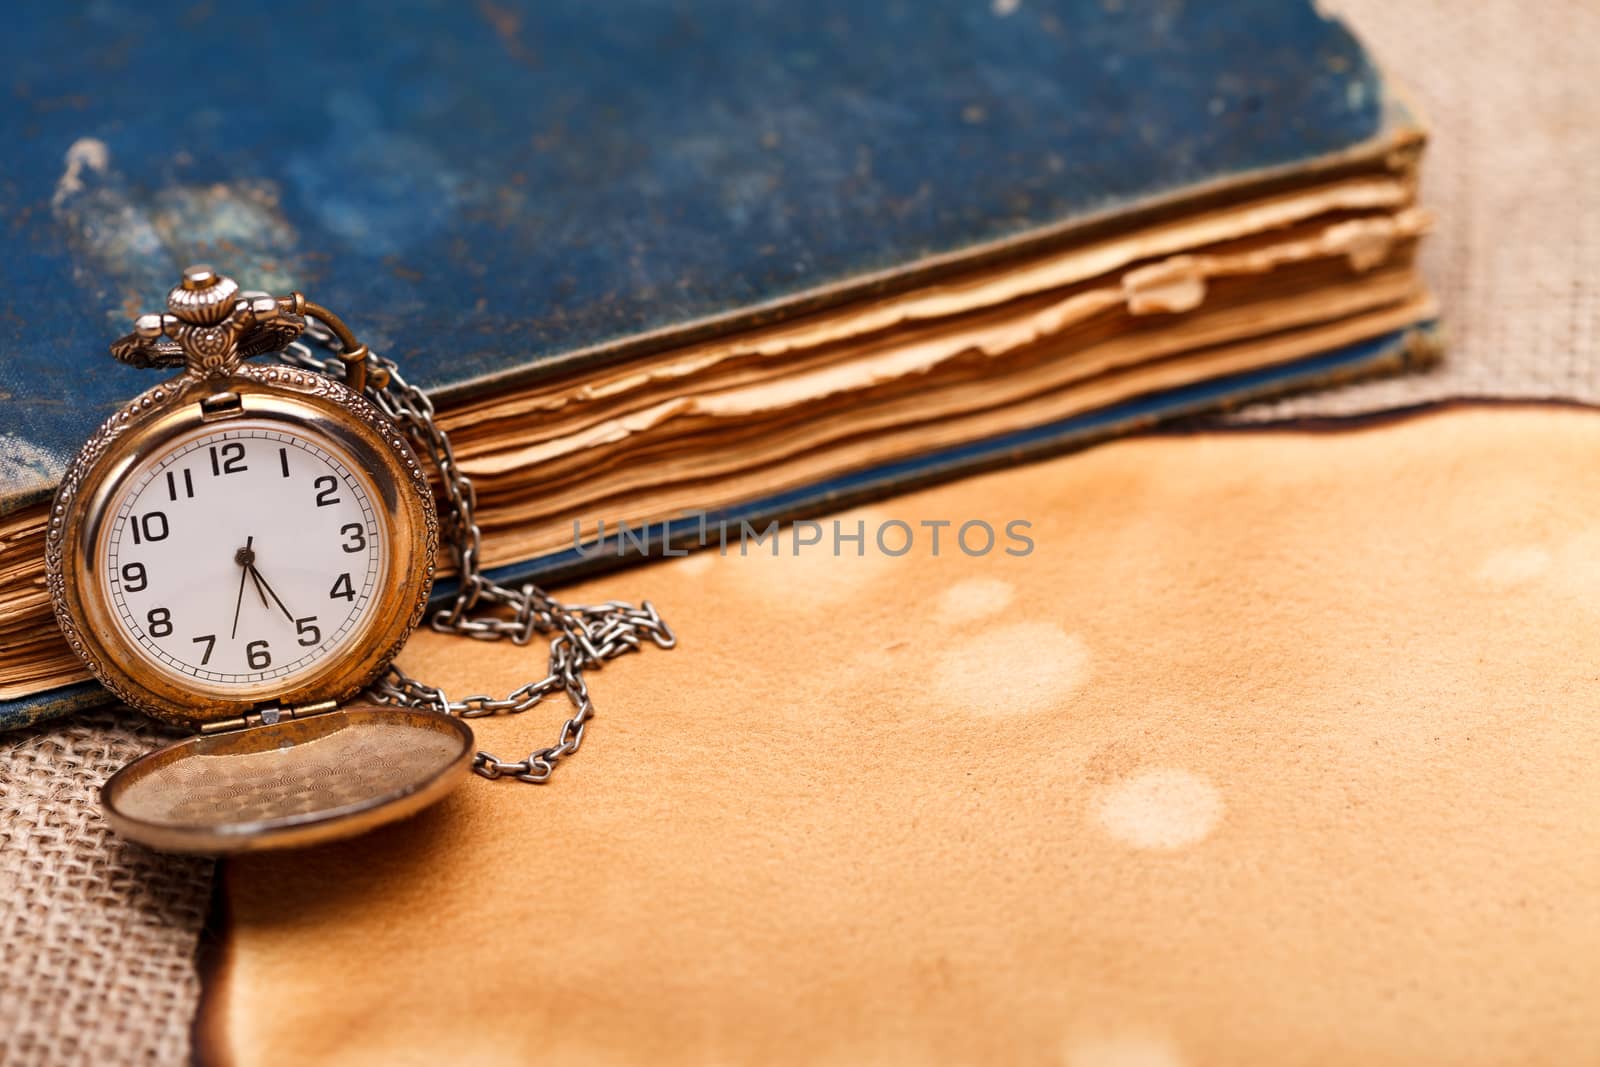 Old pocket watch with antique book and paper on burlap background.
